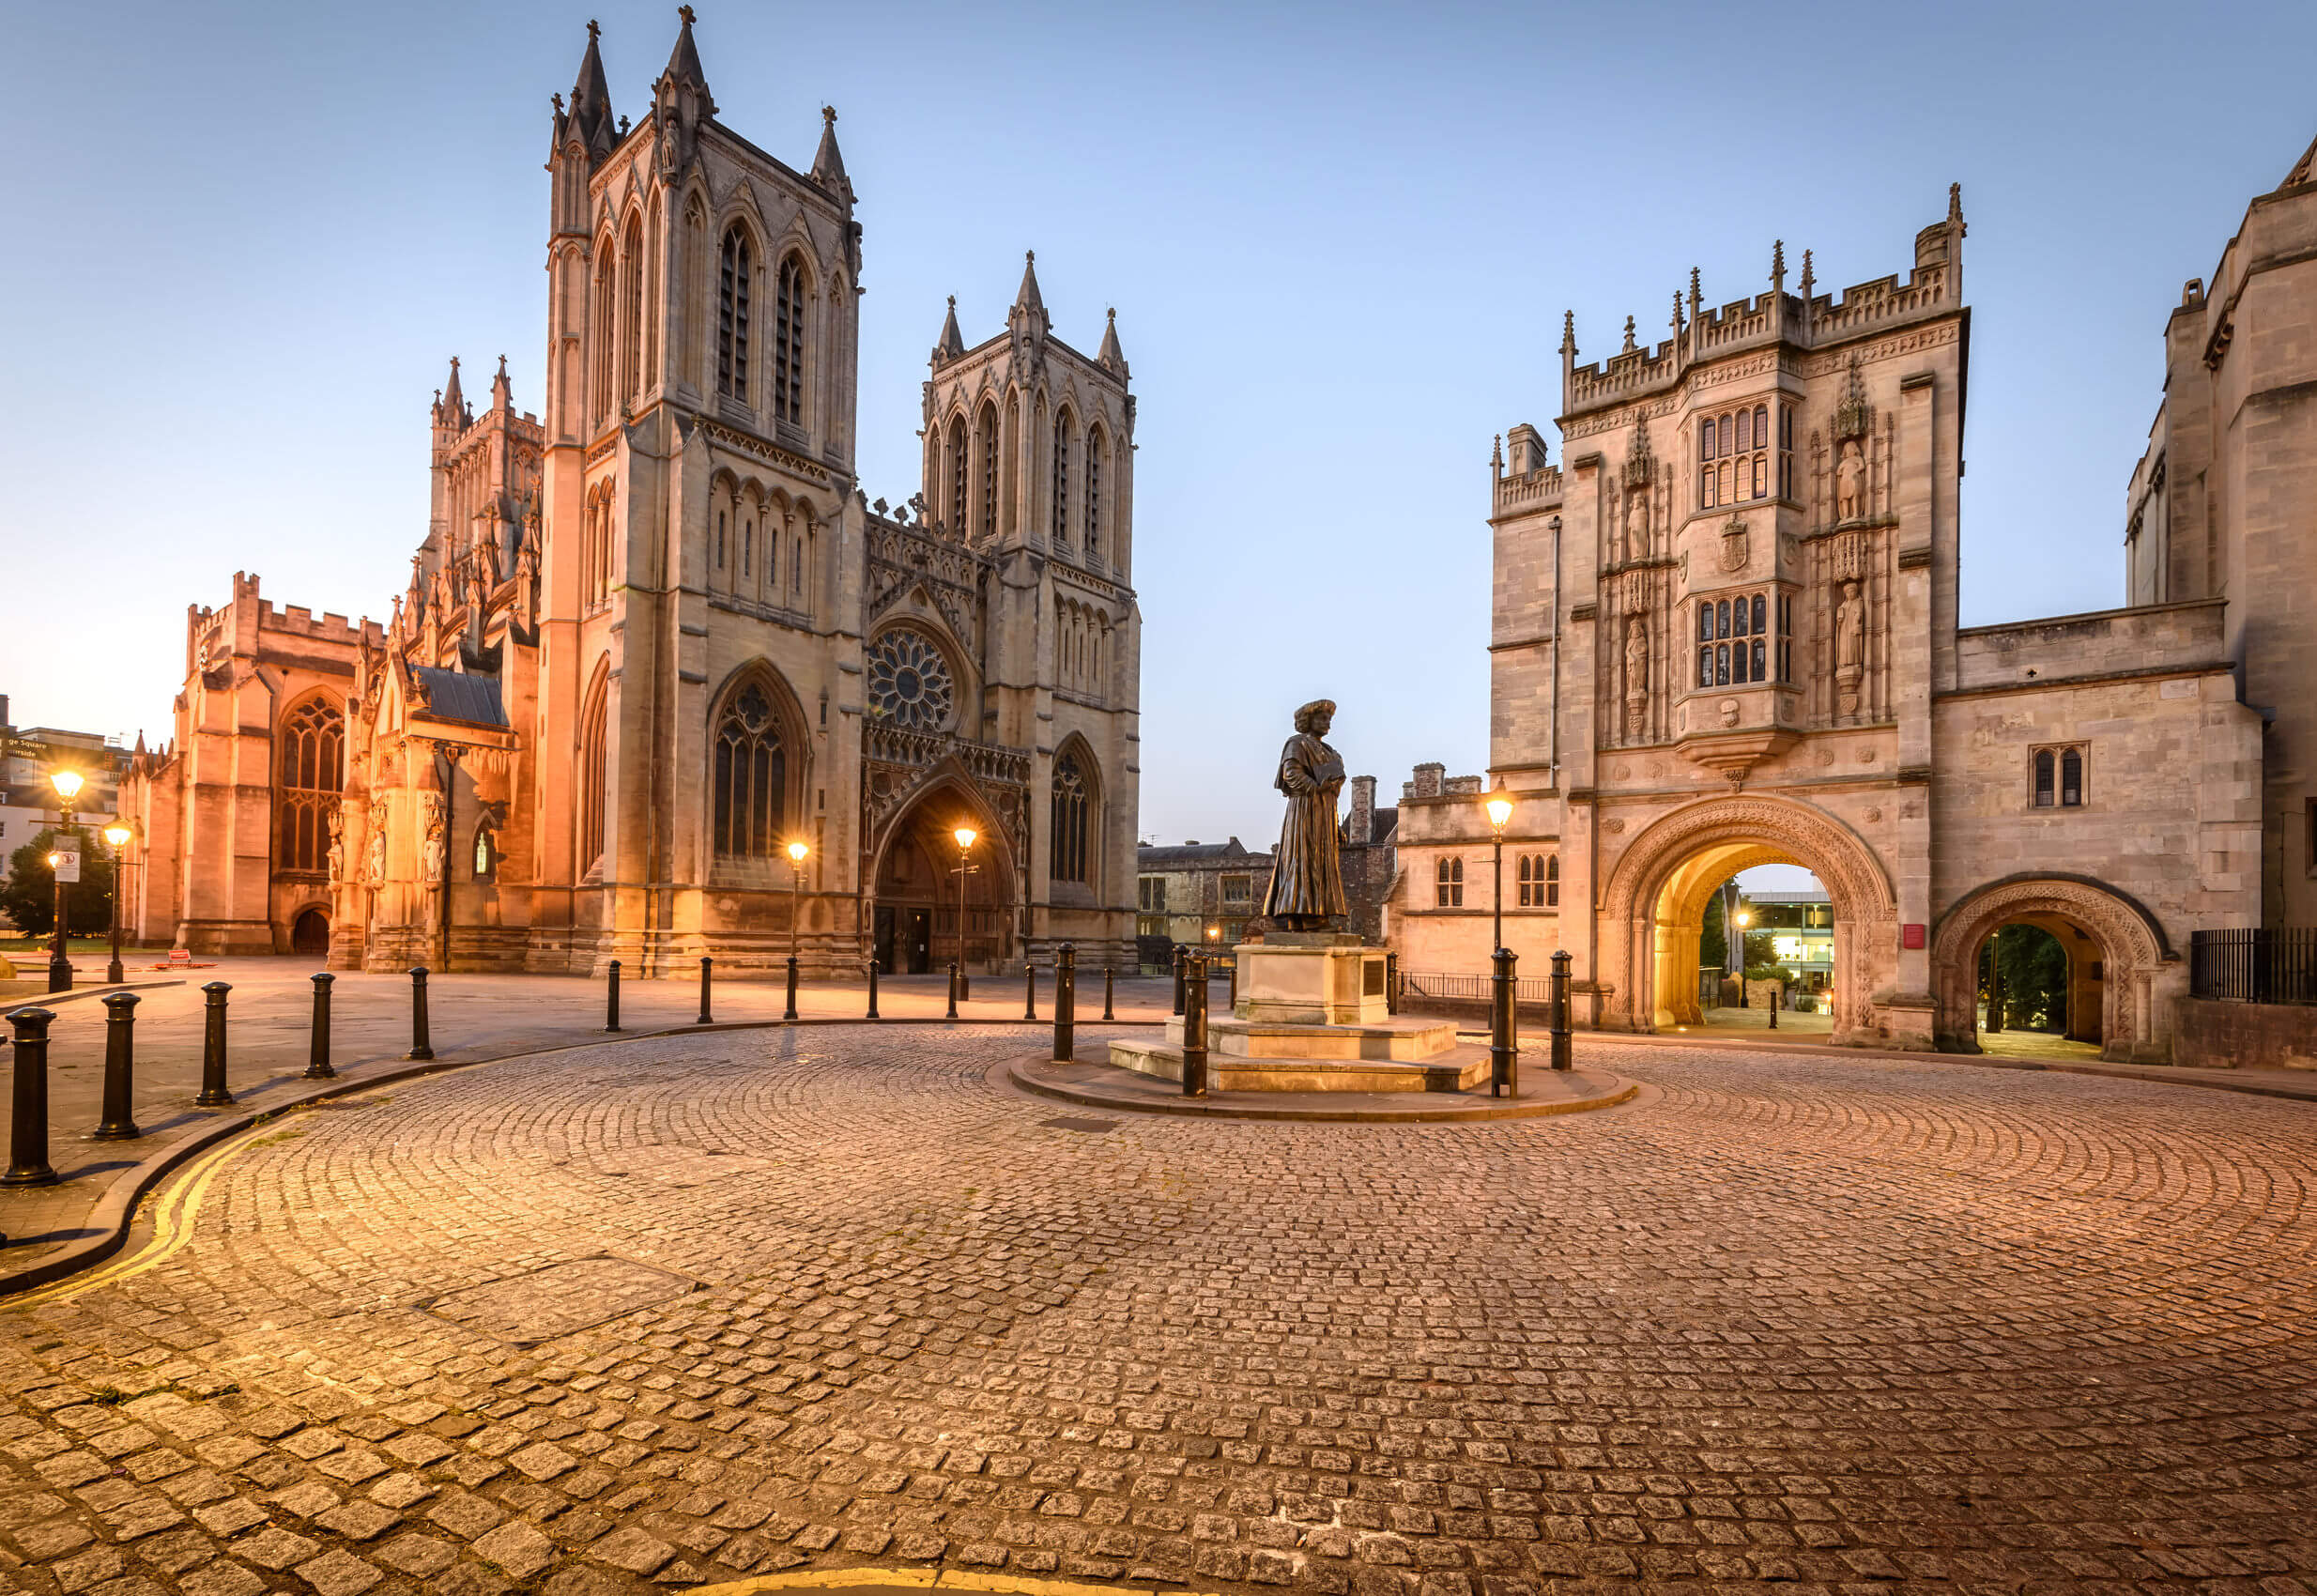 Bristol cathedral and central library are two of the famous building in Bristol, UK.